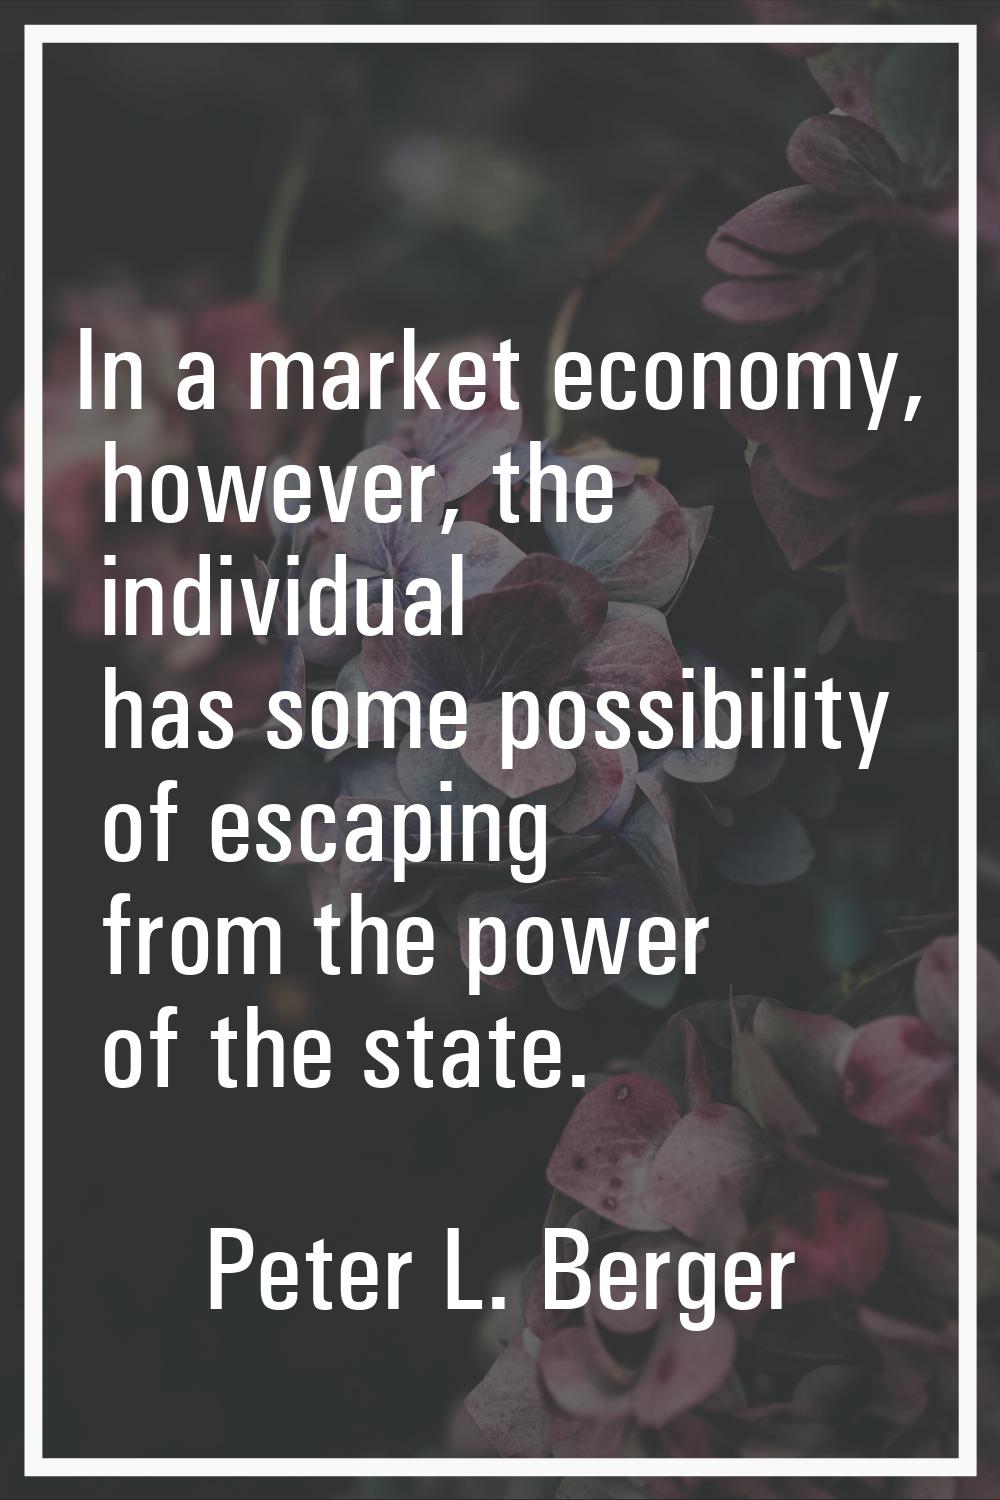 In a market economy, however, the individual has some possibility of escaping from the power of the